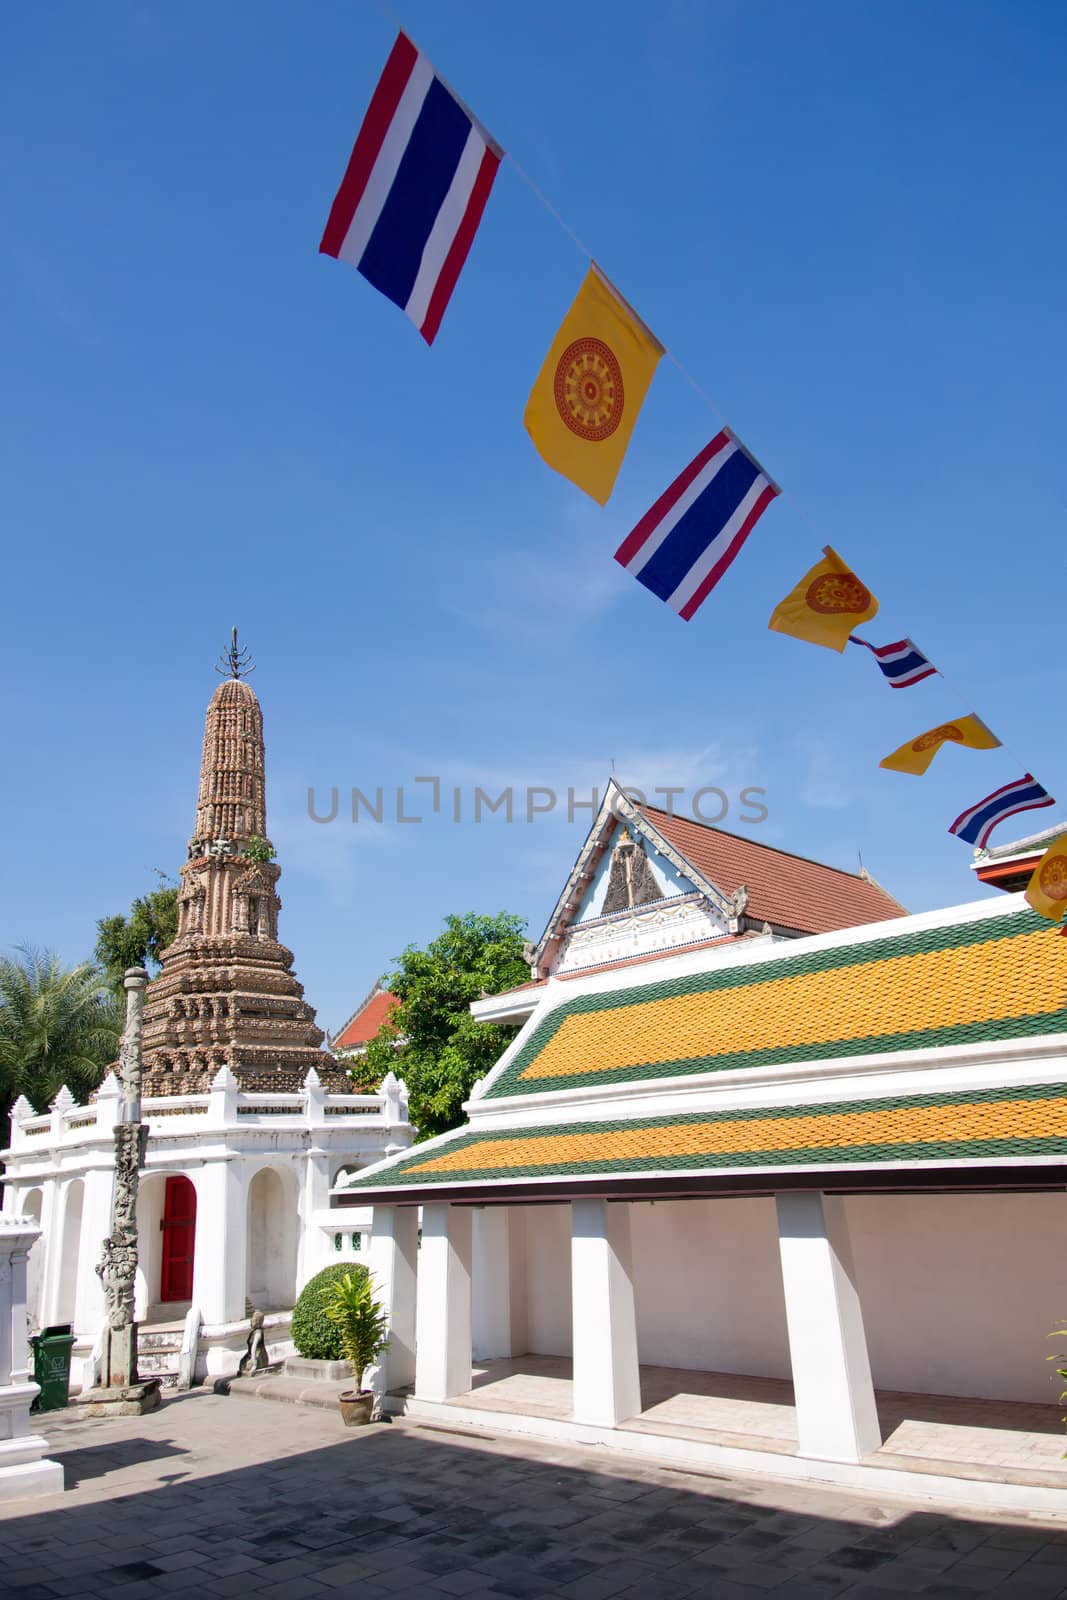 National flags in the buddhist temple, Bangkok, Thailand